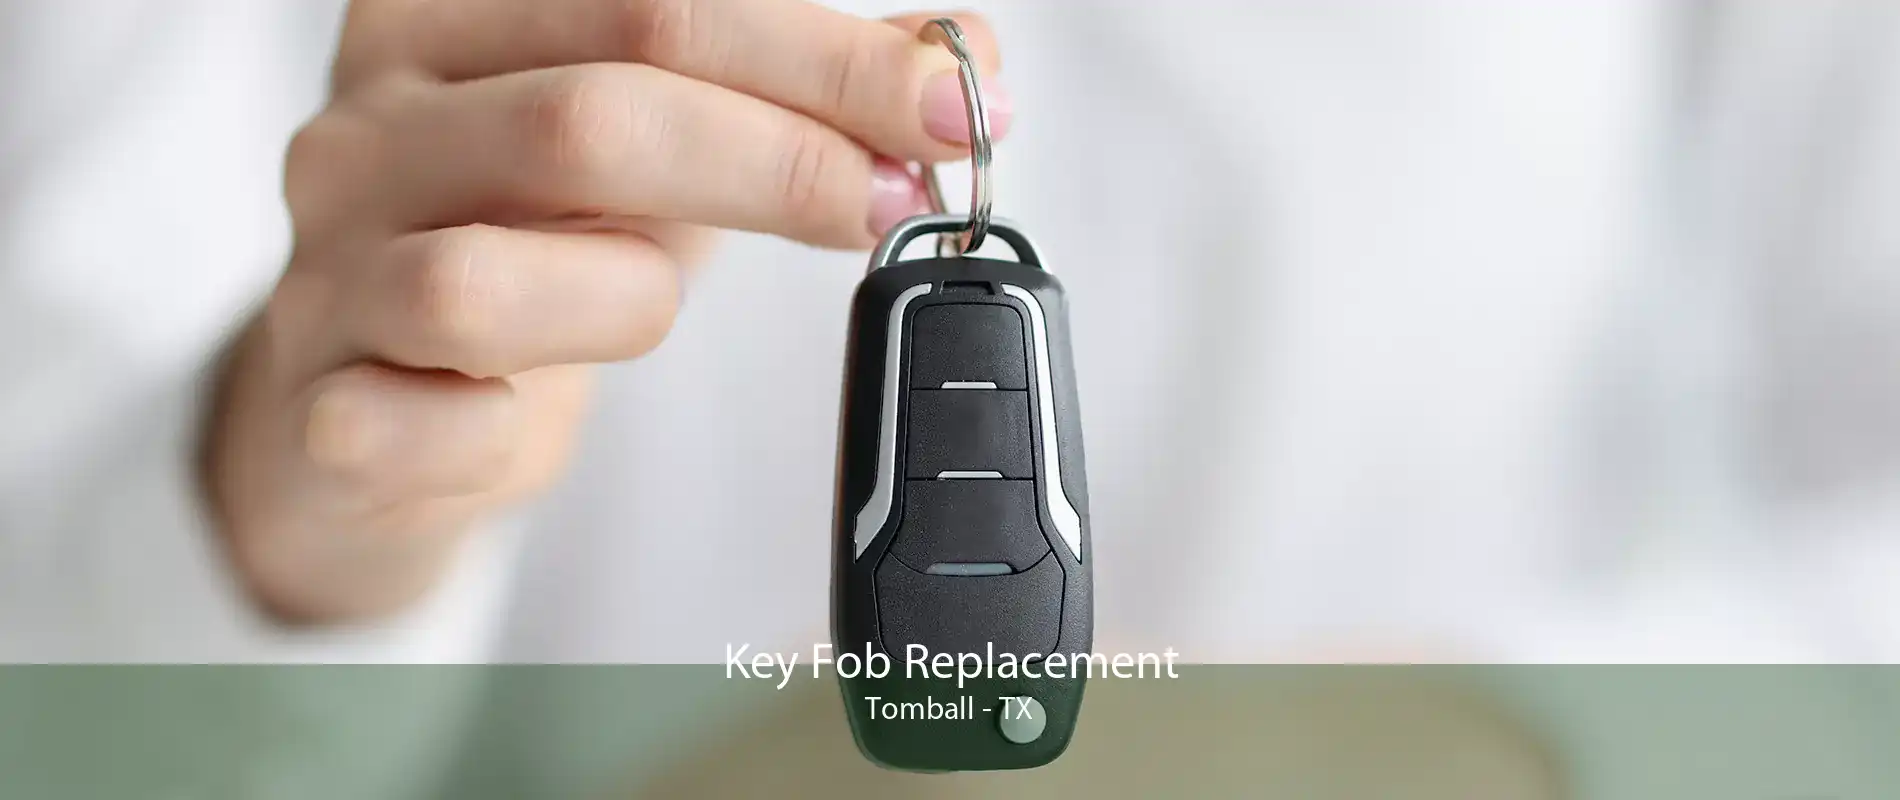 Key Fob Replacement Tomball - TX